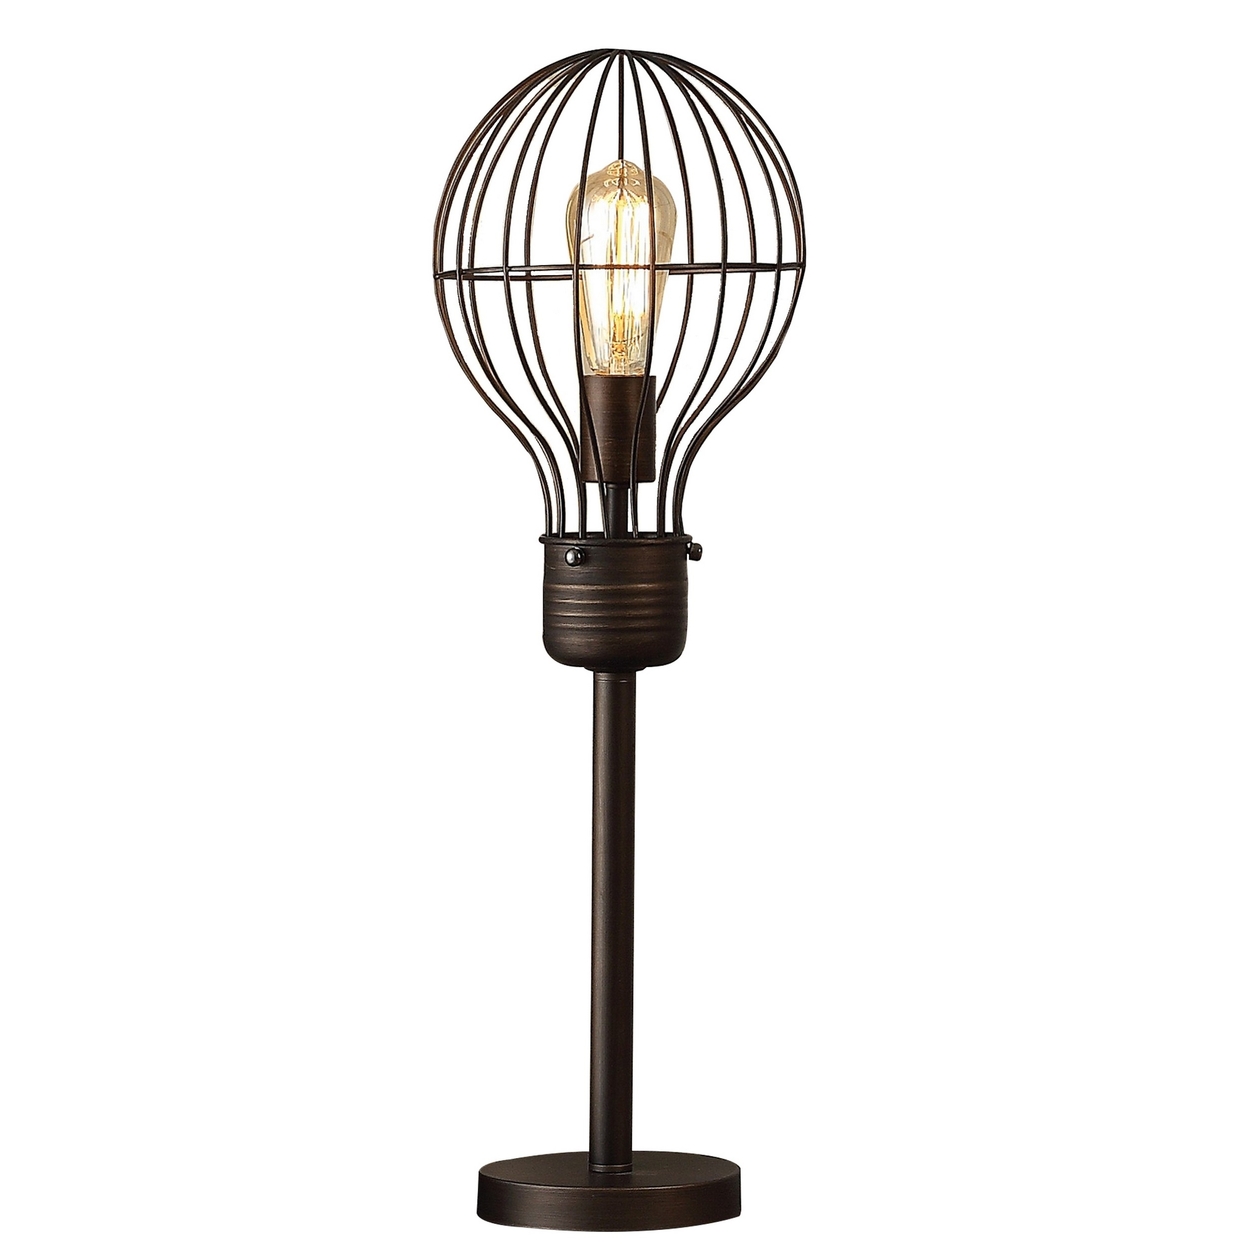 26 Inch Table Lamp, Industrial Wire Cage Shade, Metal, Antique Bronze -Saltoro Sherpi